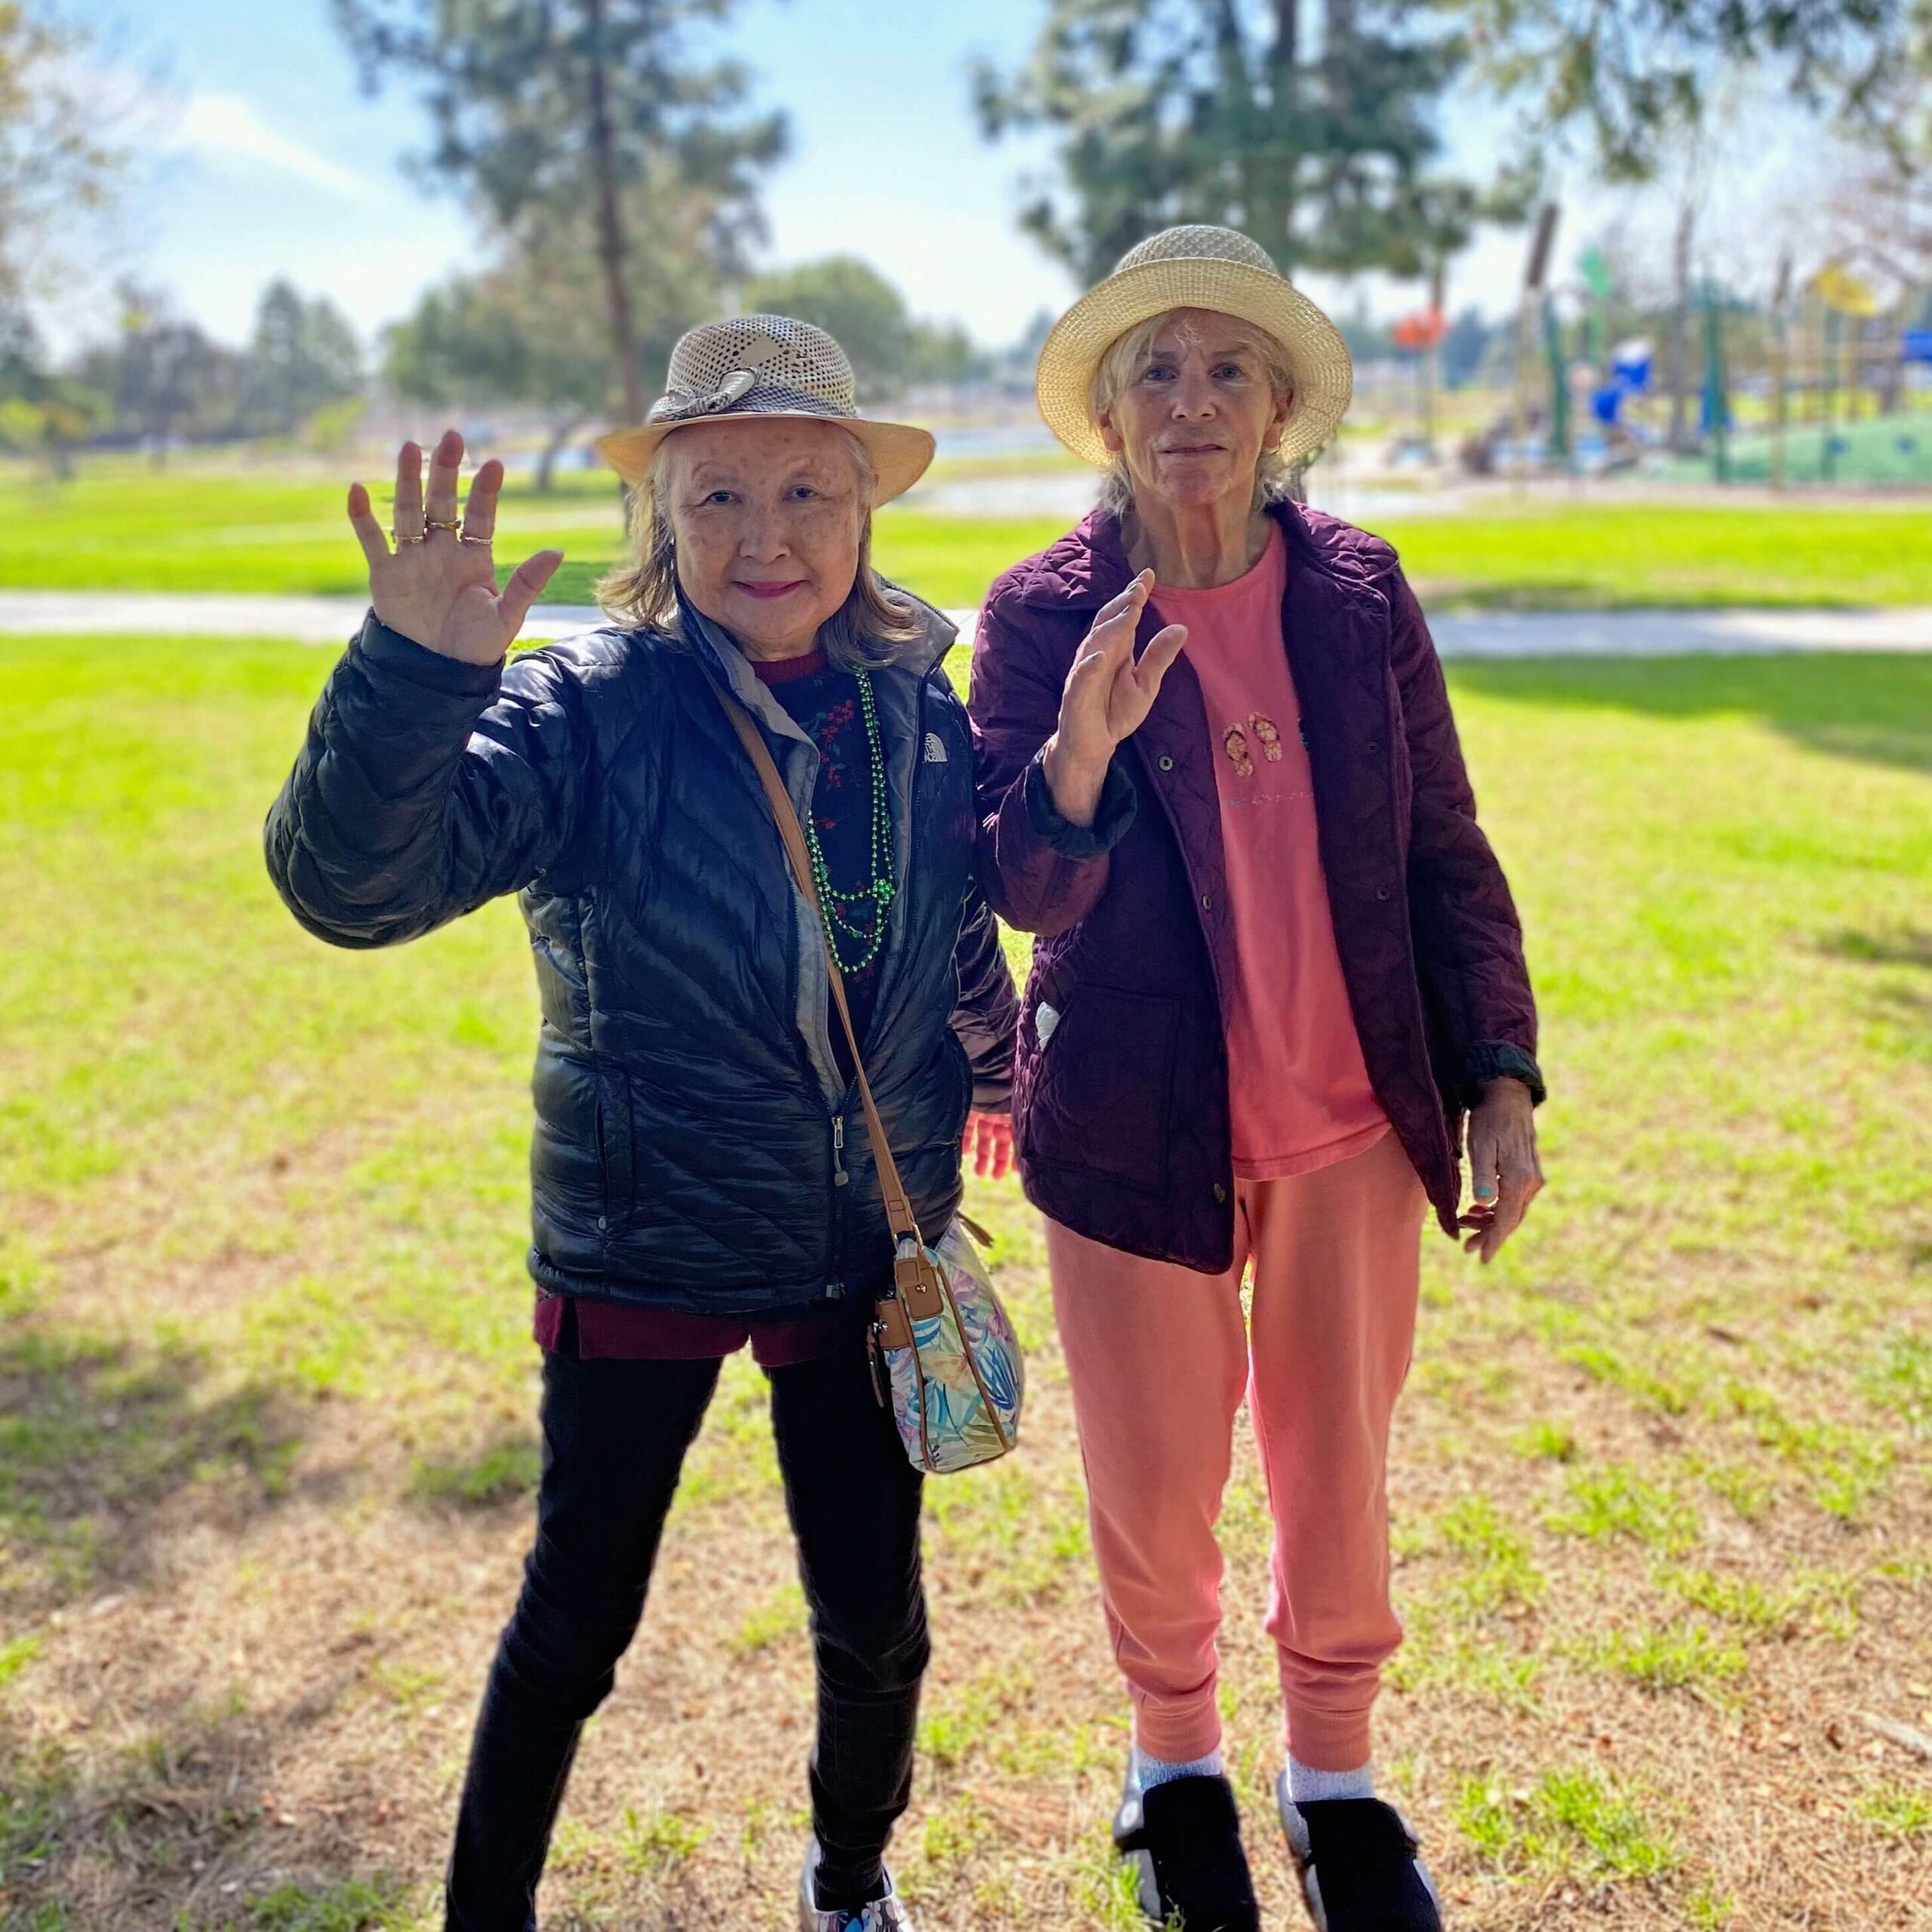 Two elderly women hanging out in a park surrounded by green grass